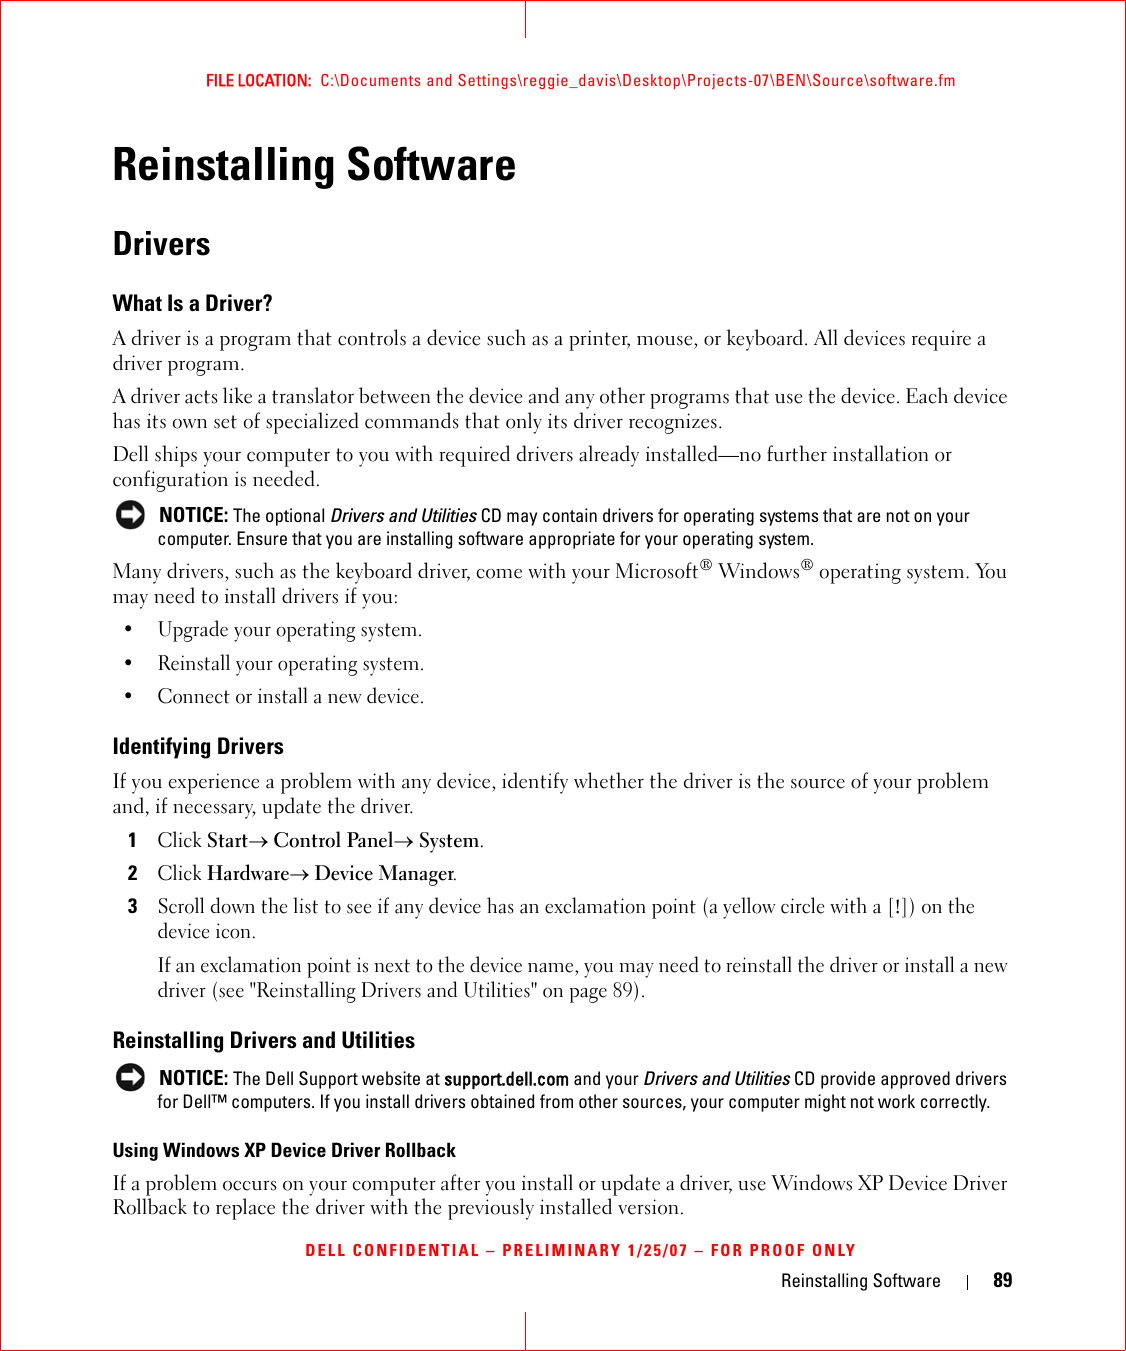 Reinstalling Software 89FILE LOCATION:  C:\Documents and Settings\reggie_davis\Desktop\Projects-07\BEN\Source\software.fmDELL CONFIDENTIAL – PRELIMINARY 1/25/07 – FOR PROOF ONLYReinstalling SoftwareDriversWhat Is a Driver?A driver is a program that controls a device such as a printer, mouse, or keyboard. All devices require a driver program.A driver acts like a translator between the device and any other programs that use the device. Each device has its own set of specialized commands that only its driver recognizes.Dell ships your computer to you with required drivers already installed—no further installation or configuration is needed. NOTICE: The optional Drivers and Utilities CD may contain drivers for operating systems that are not on your computer. Ensure that you are installing software appropriate for your operating system.Many drivers, such as the keyboard driver, come with your Microsoft® Windows® operating system. You may need to install drivers if you:• Upgrade your operating system.• Reinstall your operating system.• Connect or install a new device.Identifying DriversIf you experience a problem with any device, identify whether the driver is the source of your problem and, if necessary, update the driver.1Click Start→ Control Panel→ System.2Click Hardware→ Device Manager.3Scroll down the list to see if any device has an exclamation point (a yellow circle with a [!]) on the device icon.If an exclamation point is next to the device name, you may need to reinstall the driver or install a new driver (see &quot;Reinstalling Drivers and Utilities&quot; on page 89).Reinstalling Drivers and Utilities NOTICE: The Dell Support website at support.dell.com and your Drivers and Utilities CD provide approved drivers for Dell™ computers. If you install drivers obtained from other sources, your computer might not work correctly.Using Windows XP Device Driver RollbackIf a problem occurs on your computer after you install or update a driver, use Windows XP Device Driver Rollback to replace the driver with the previously installed version.